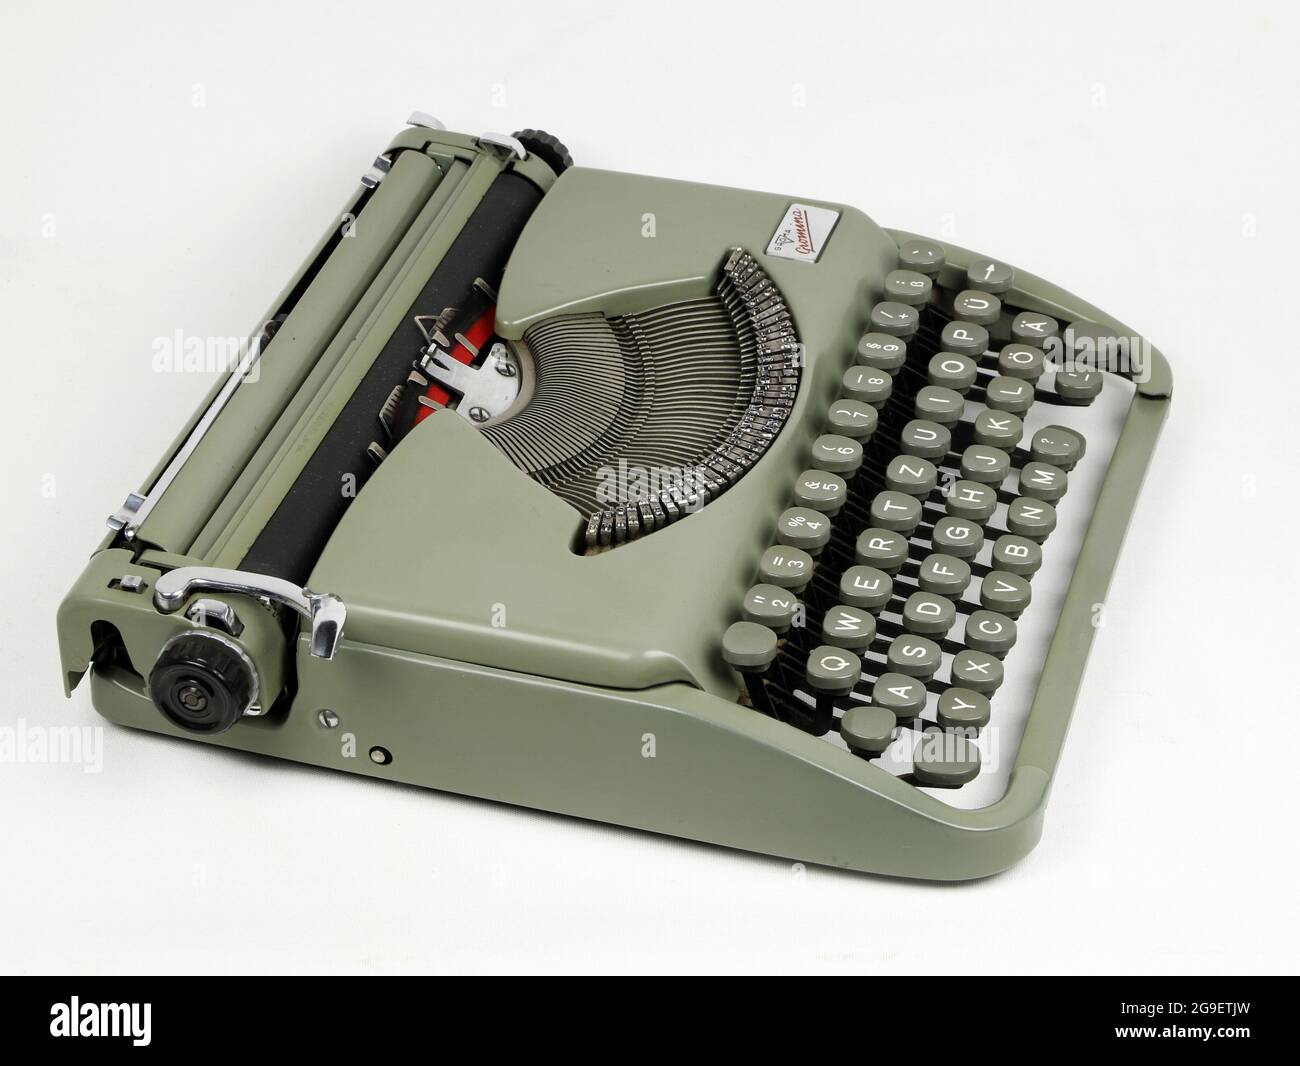 technique, portable typewriter Gromina, producer: VEB groma, ADDITIONAL-RIGHTS-CLEARANCE-INFO-NOT-AVAILABLE Stock Photo